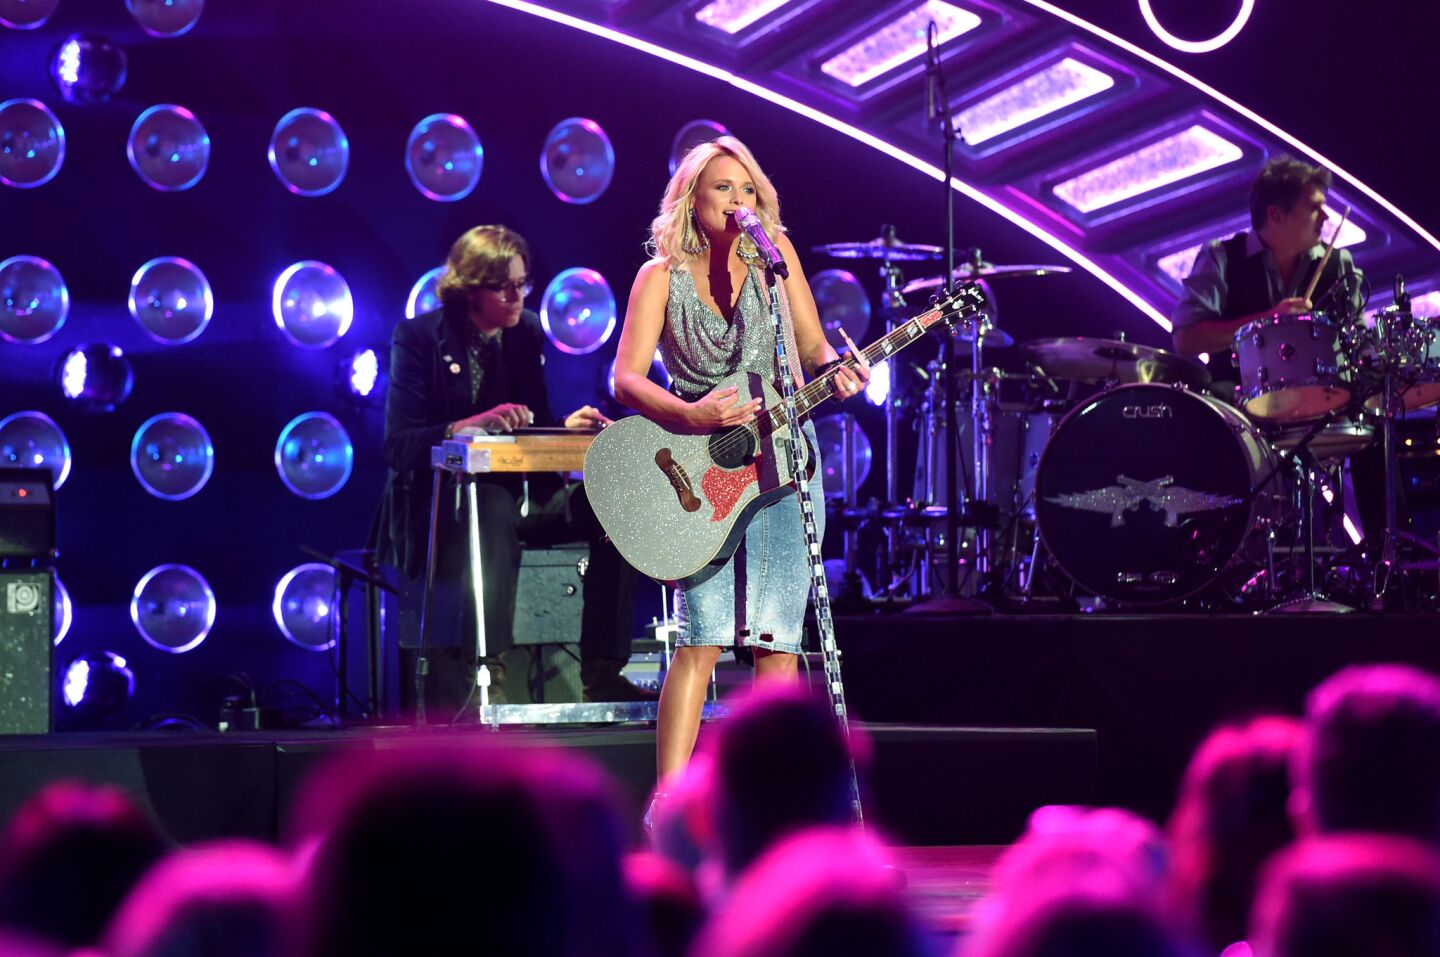 Miranda Lambert, who won the female country performance Grammy in 2011, has four nominations this year for country solo performance, country duo/group performance, country song and country album.